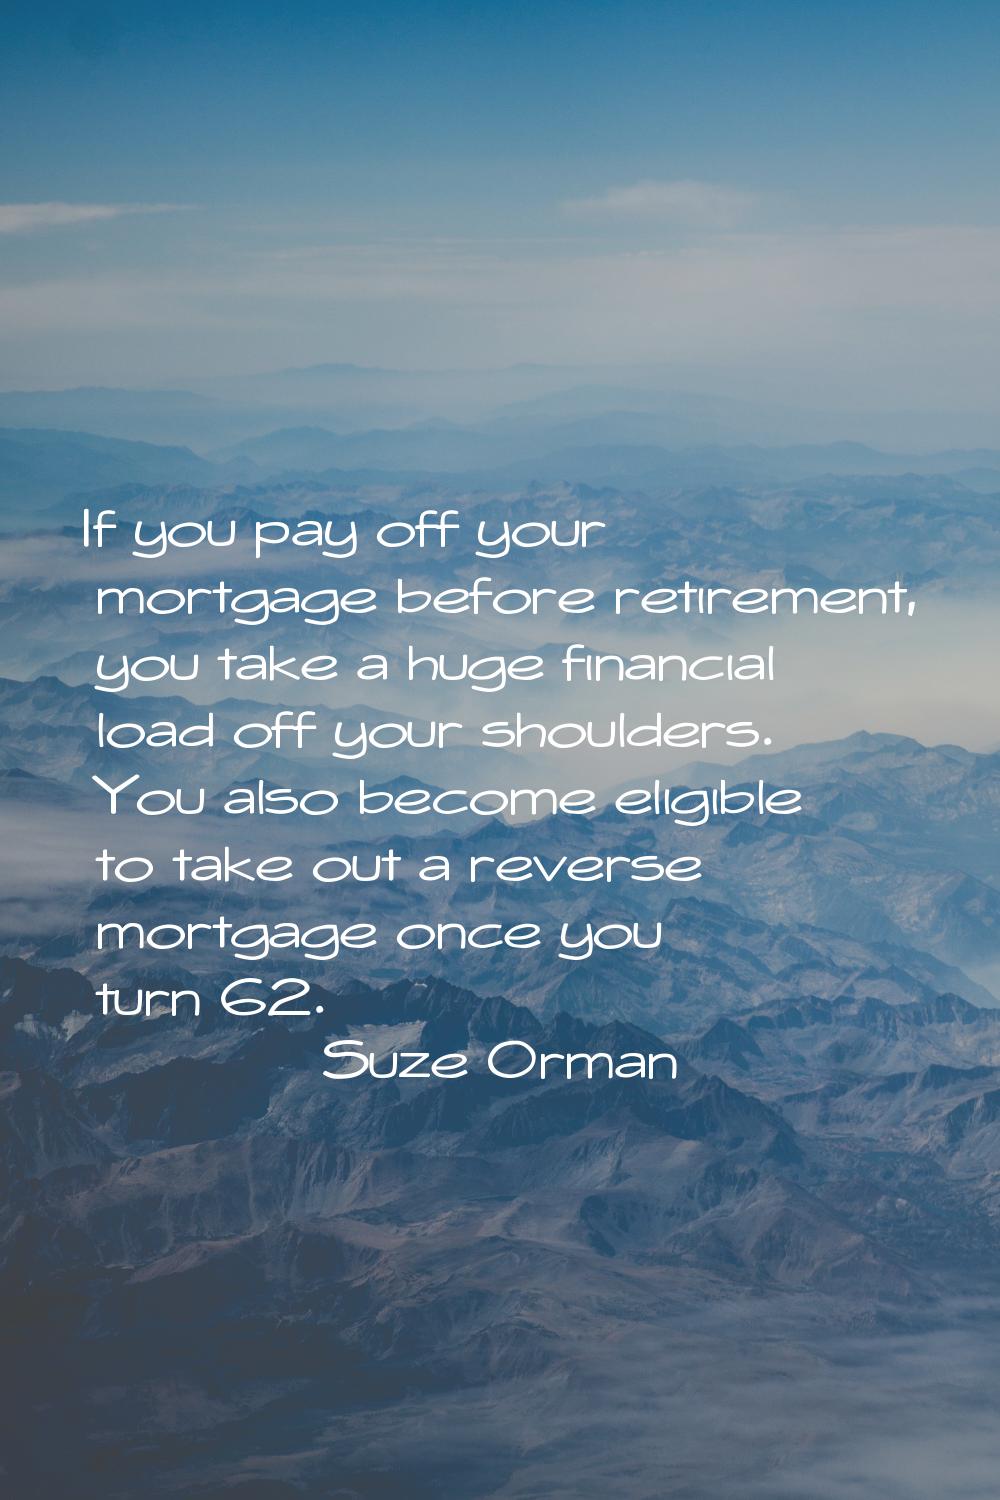 If you pay off your mortgage before retirement, you take a huge financial load off your shoulders. 